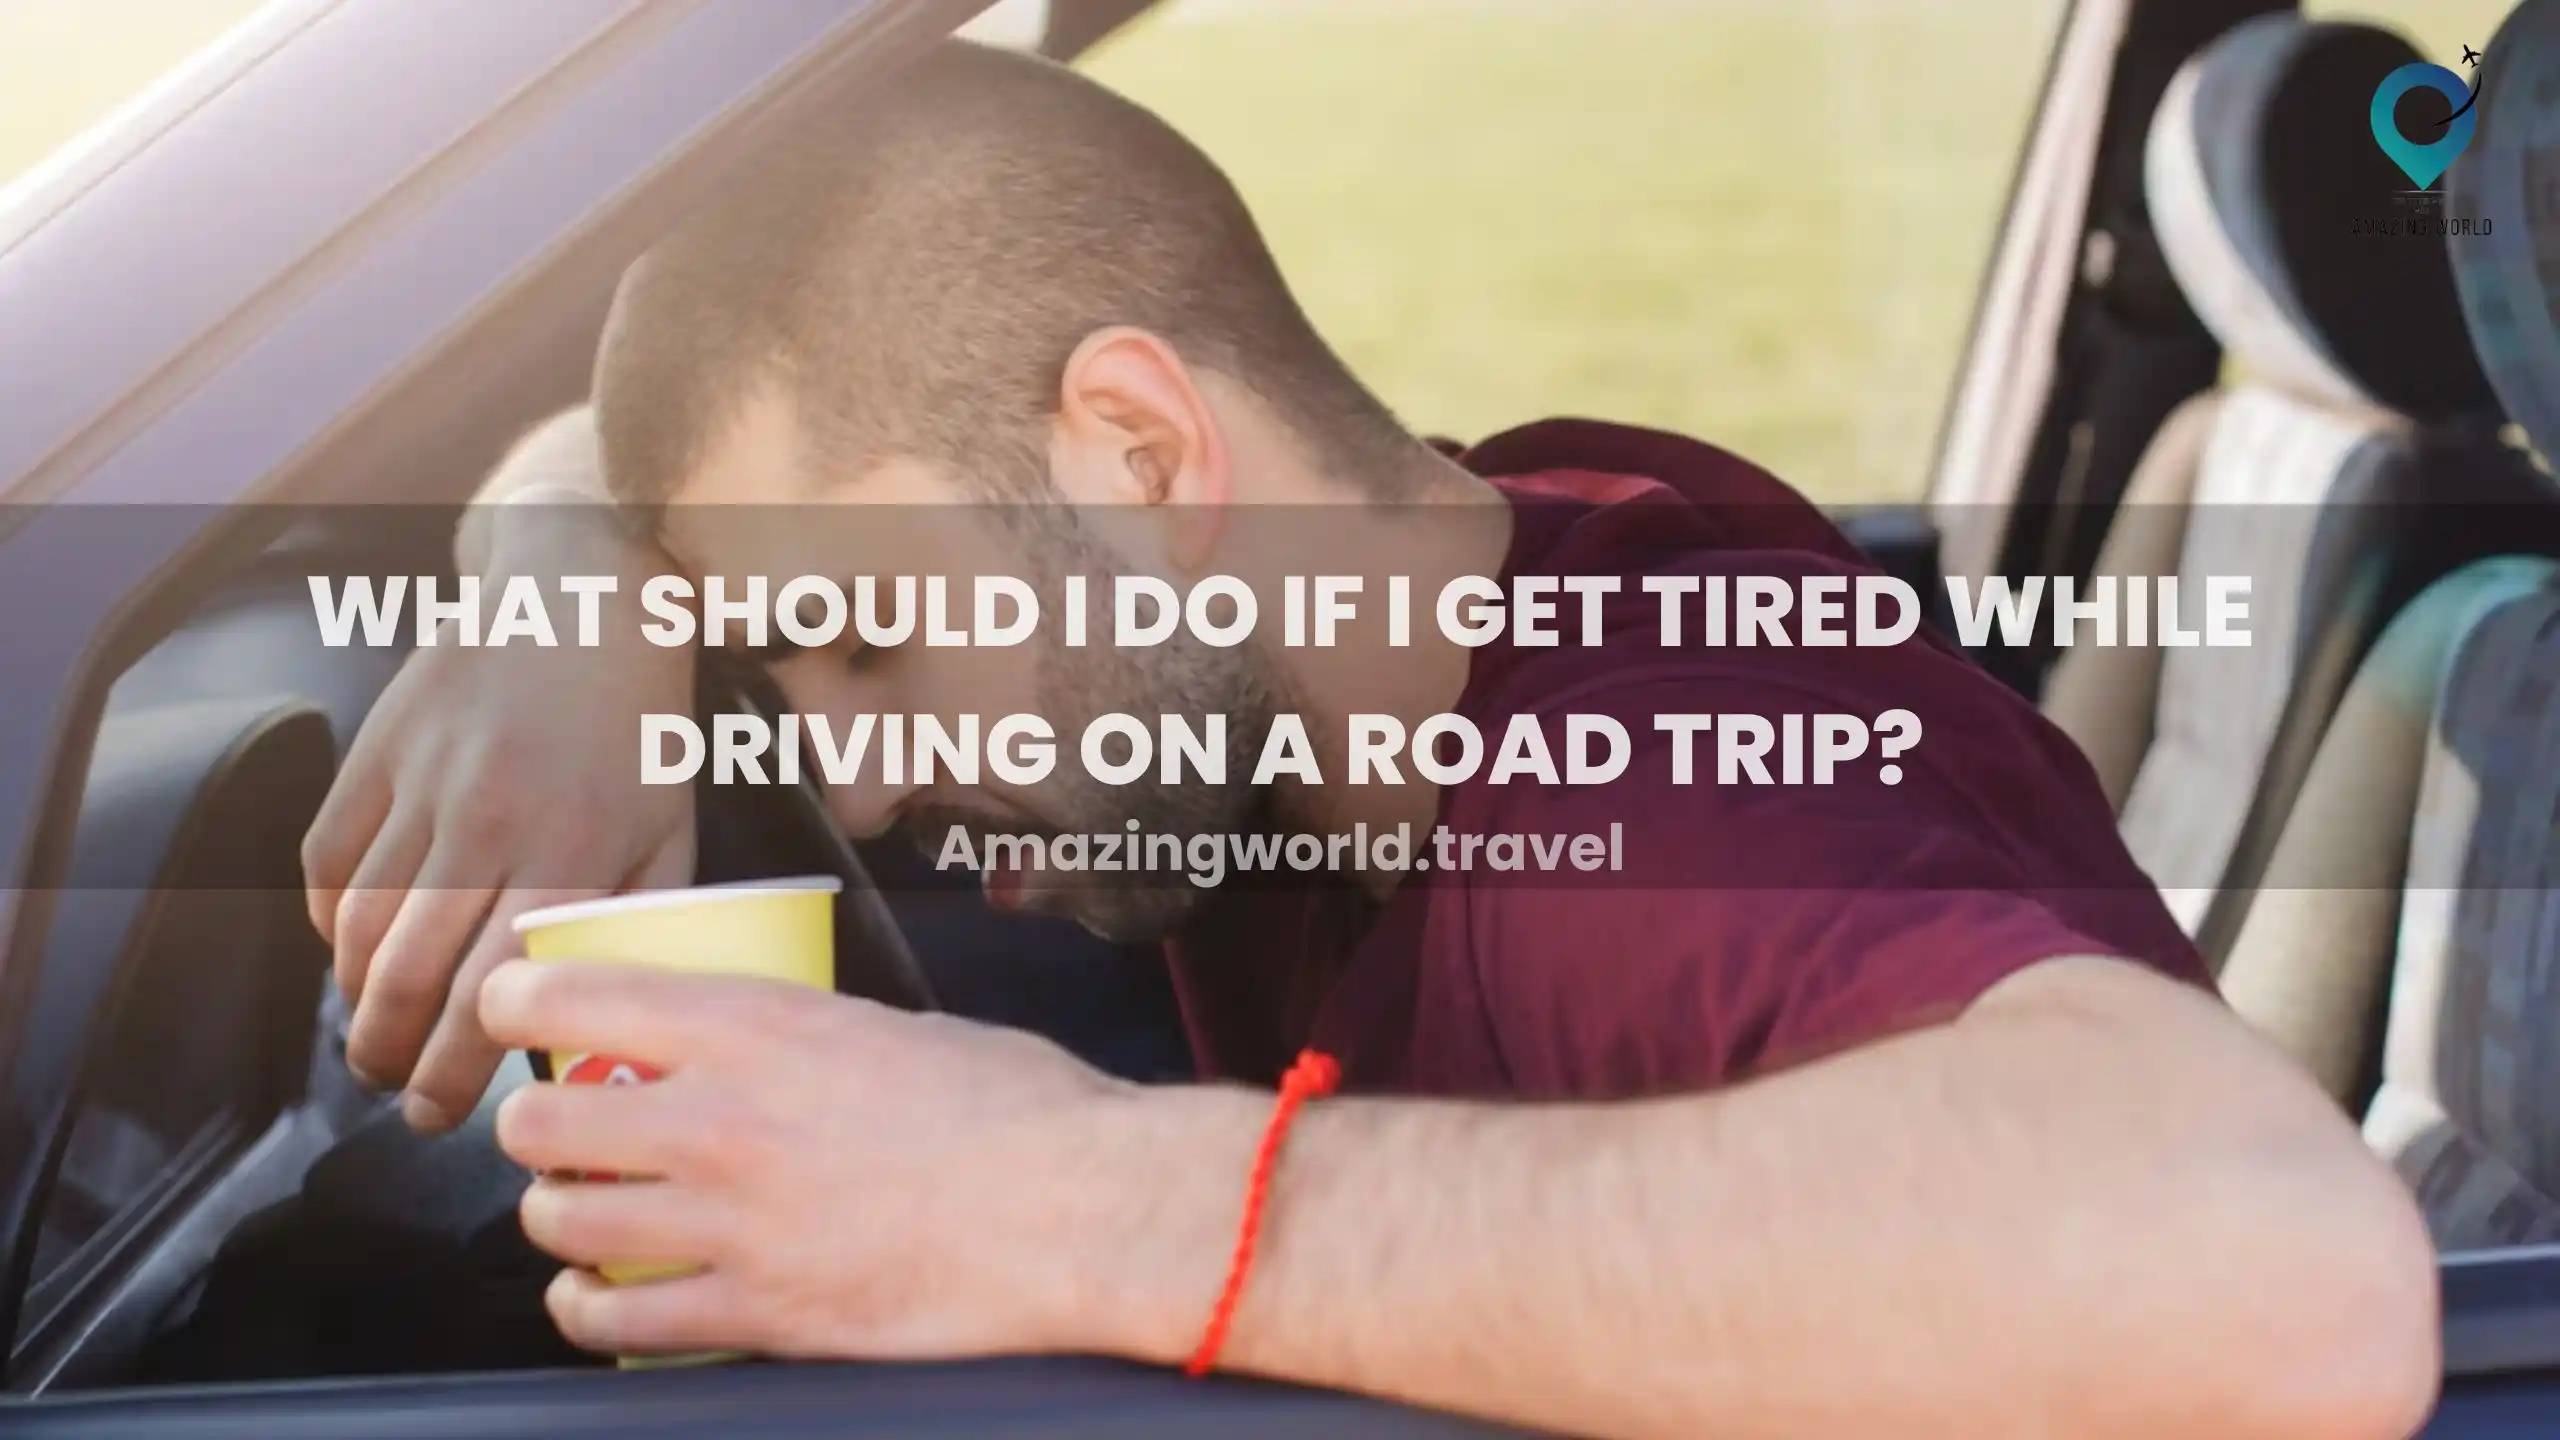 What Should I Do If I Get Tired While Driving on a Road Trip